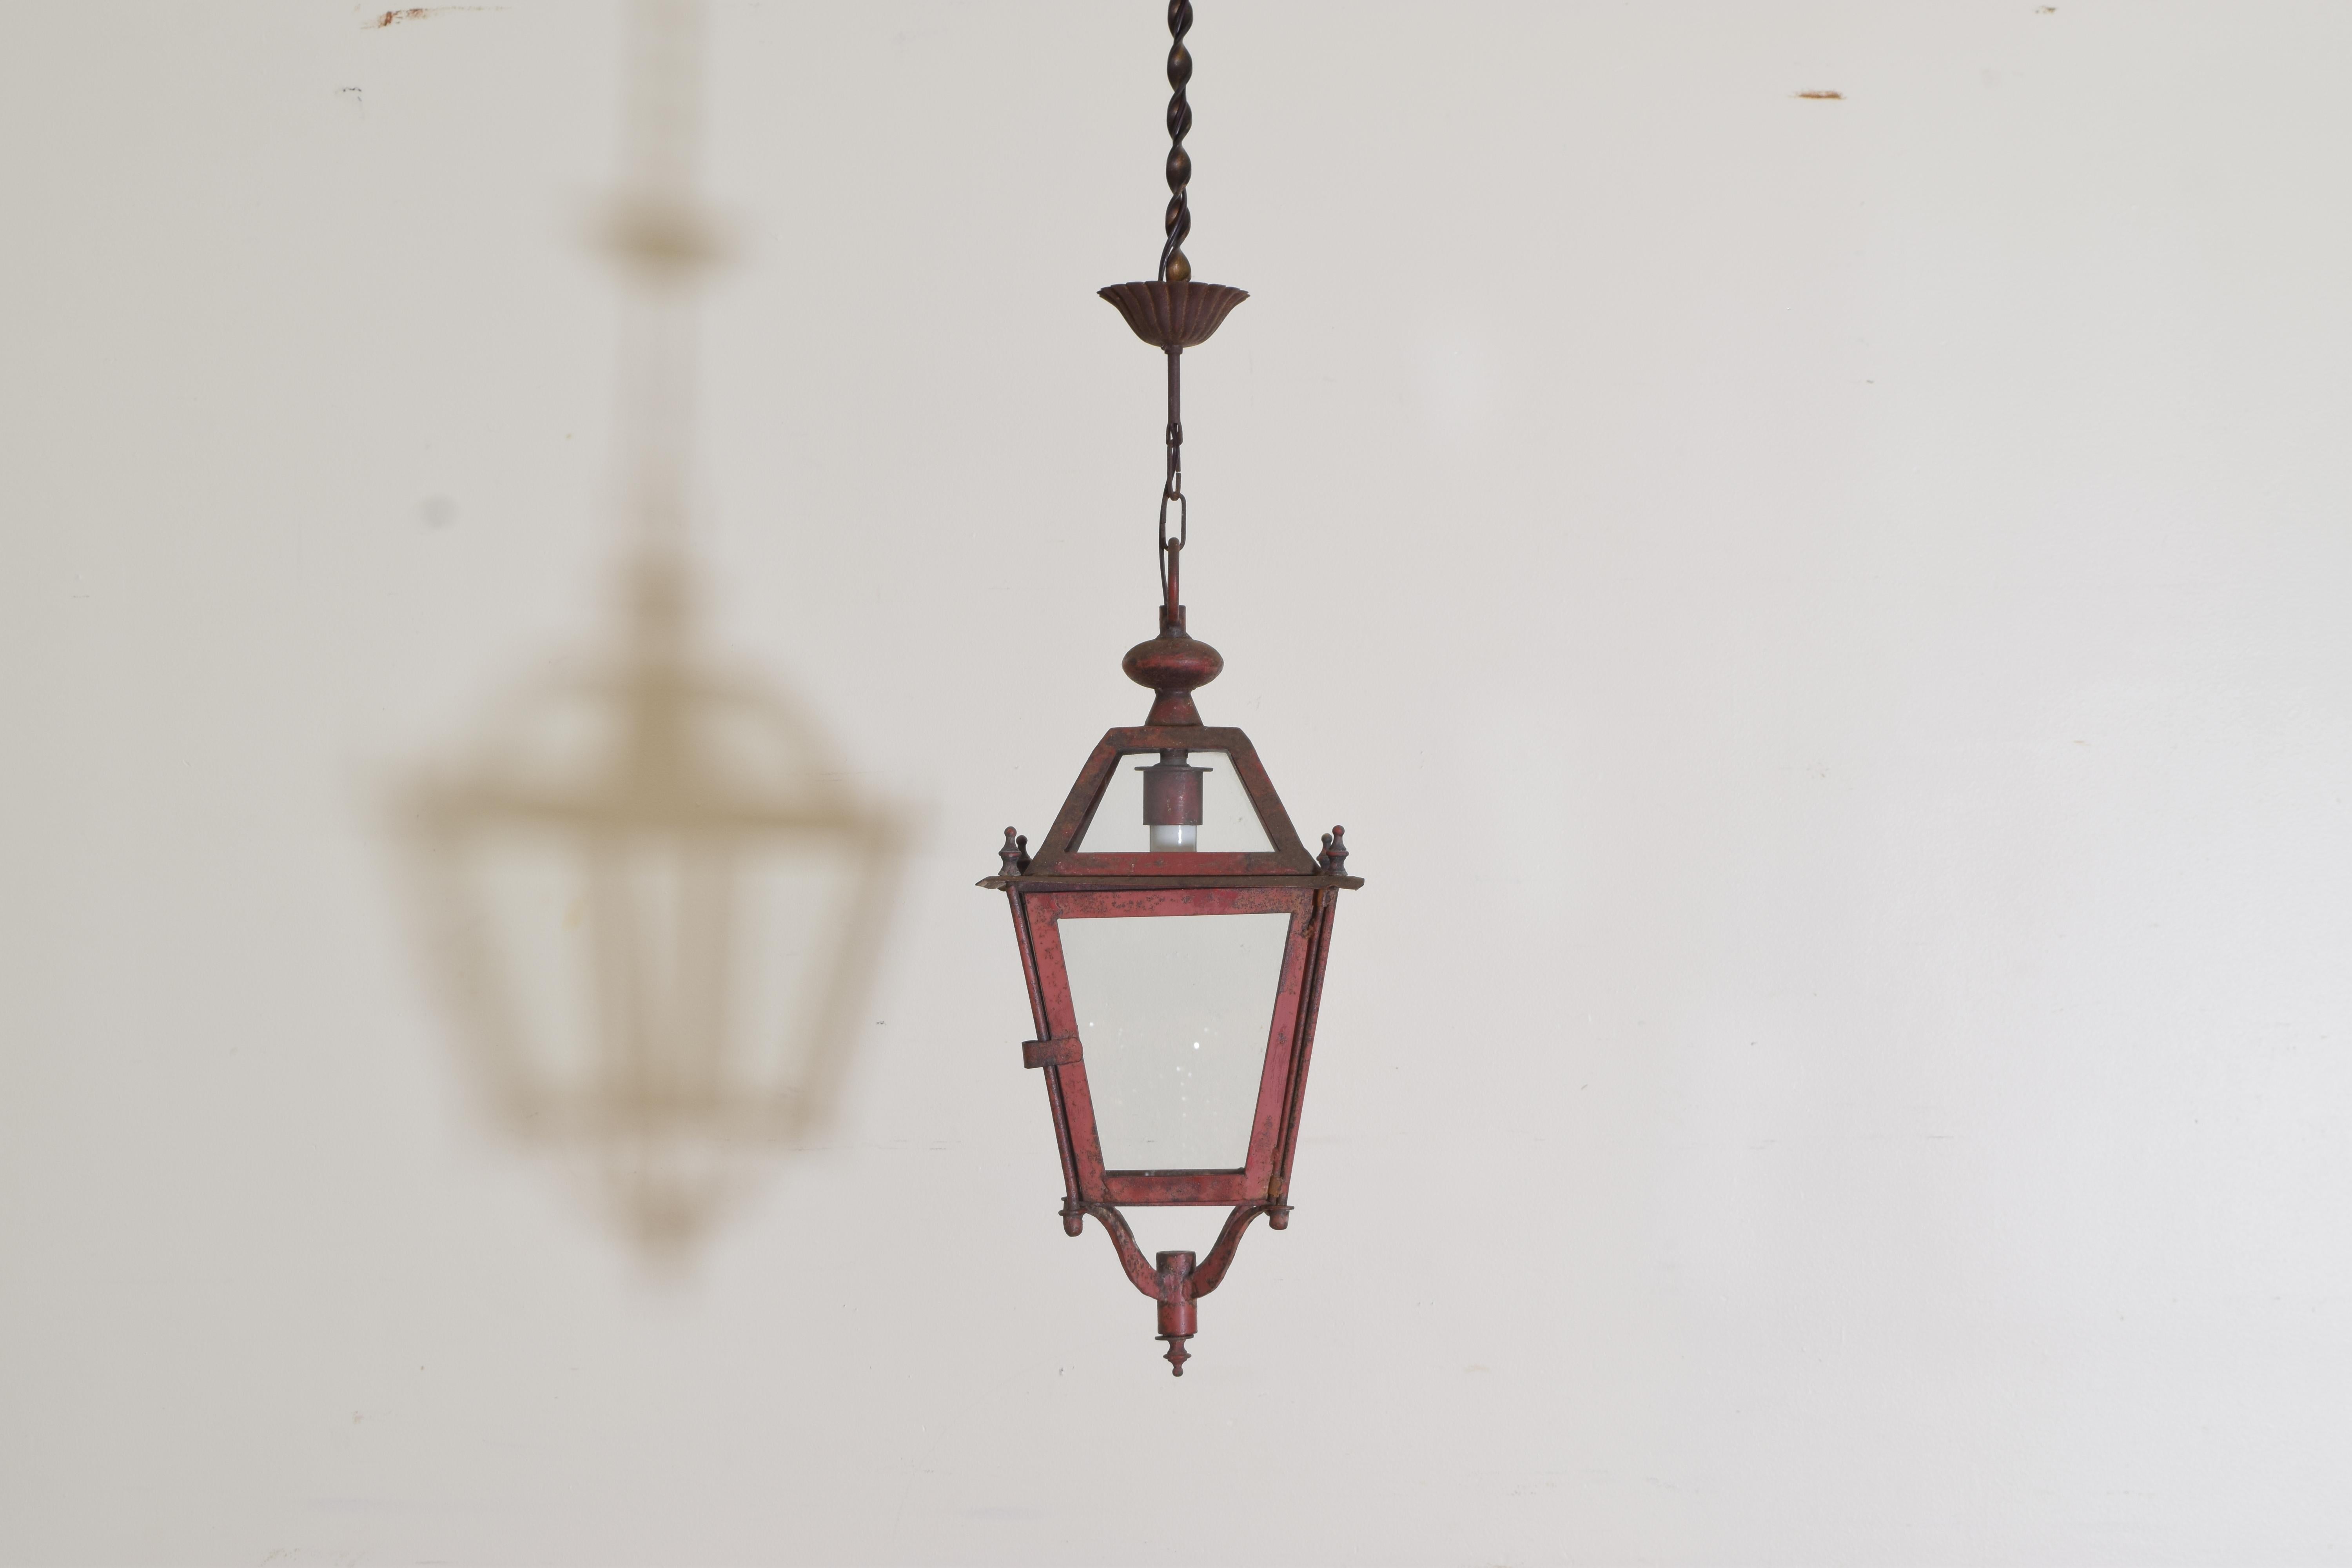 We were so excited to find this set of 11 red-painted lanterns. They are all in great aged condition retaining their original canopies which are wrought with scalloped edges. The glass roof sits over tapered lanterns having finials decorating the